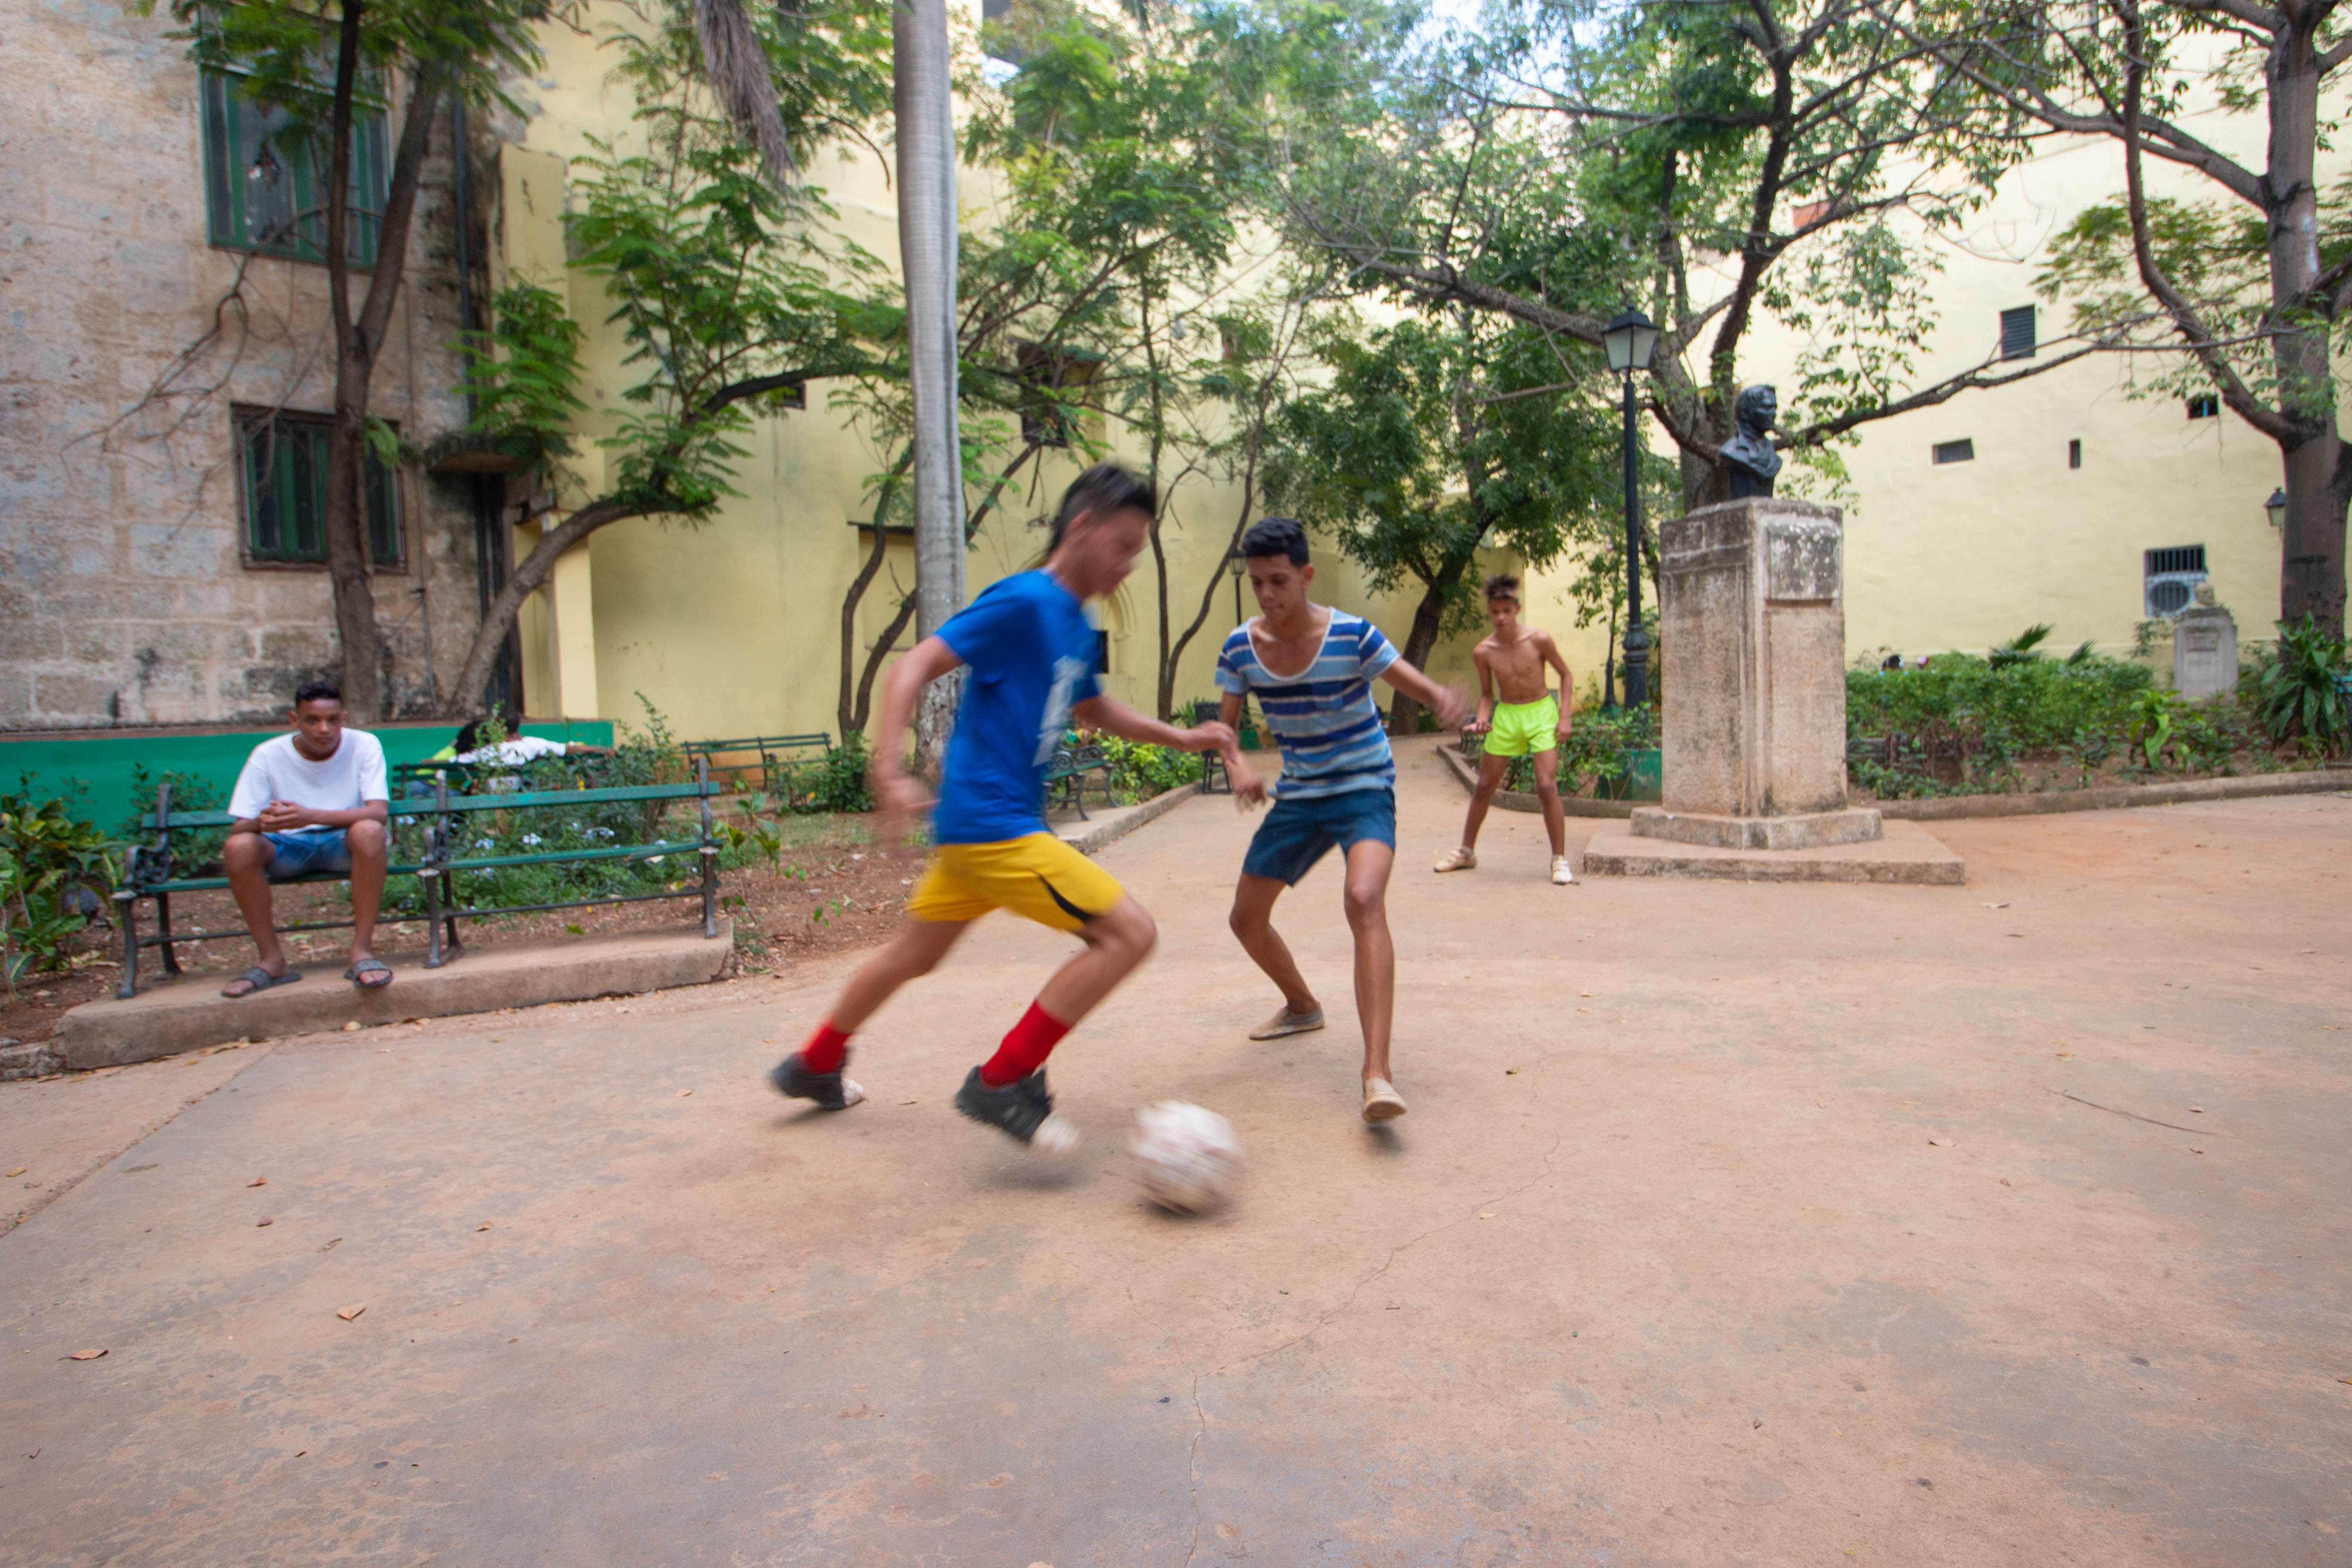 Soccer and baseball are the two most popular sports, kids would flock to any open ground they can find after school. Here, they have improvised two goals with the bushes lining the paths of the public garden. The matches are intense yet filled with goofiness alongside Messi jerseys.